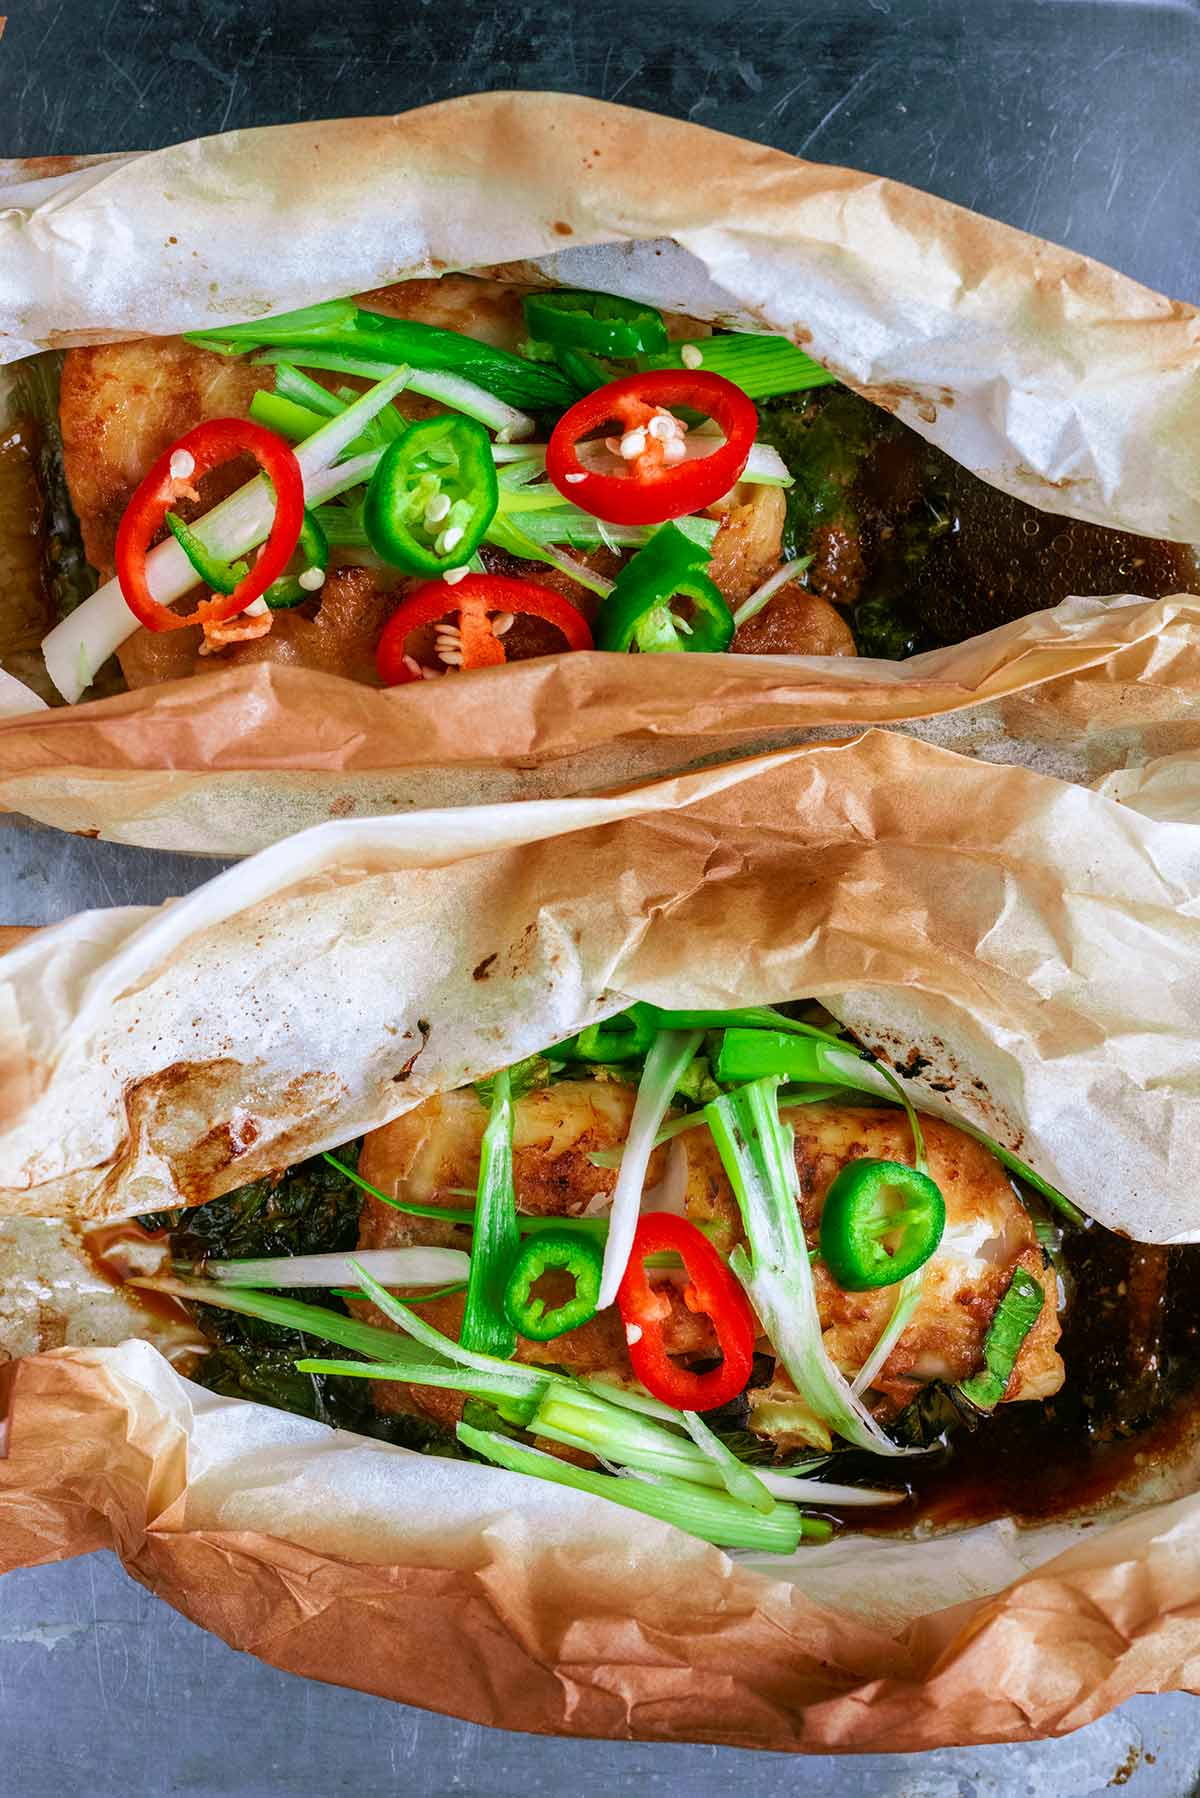 Two open parchment paper parcels containing fish, onions, chillies and a dark sauce.